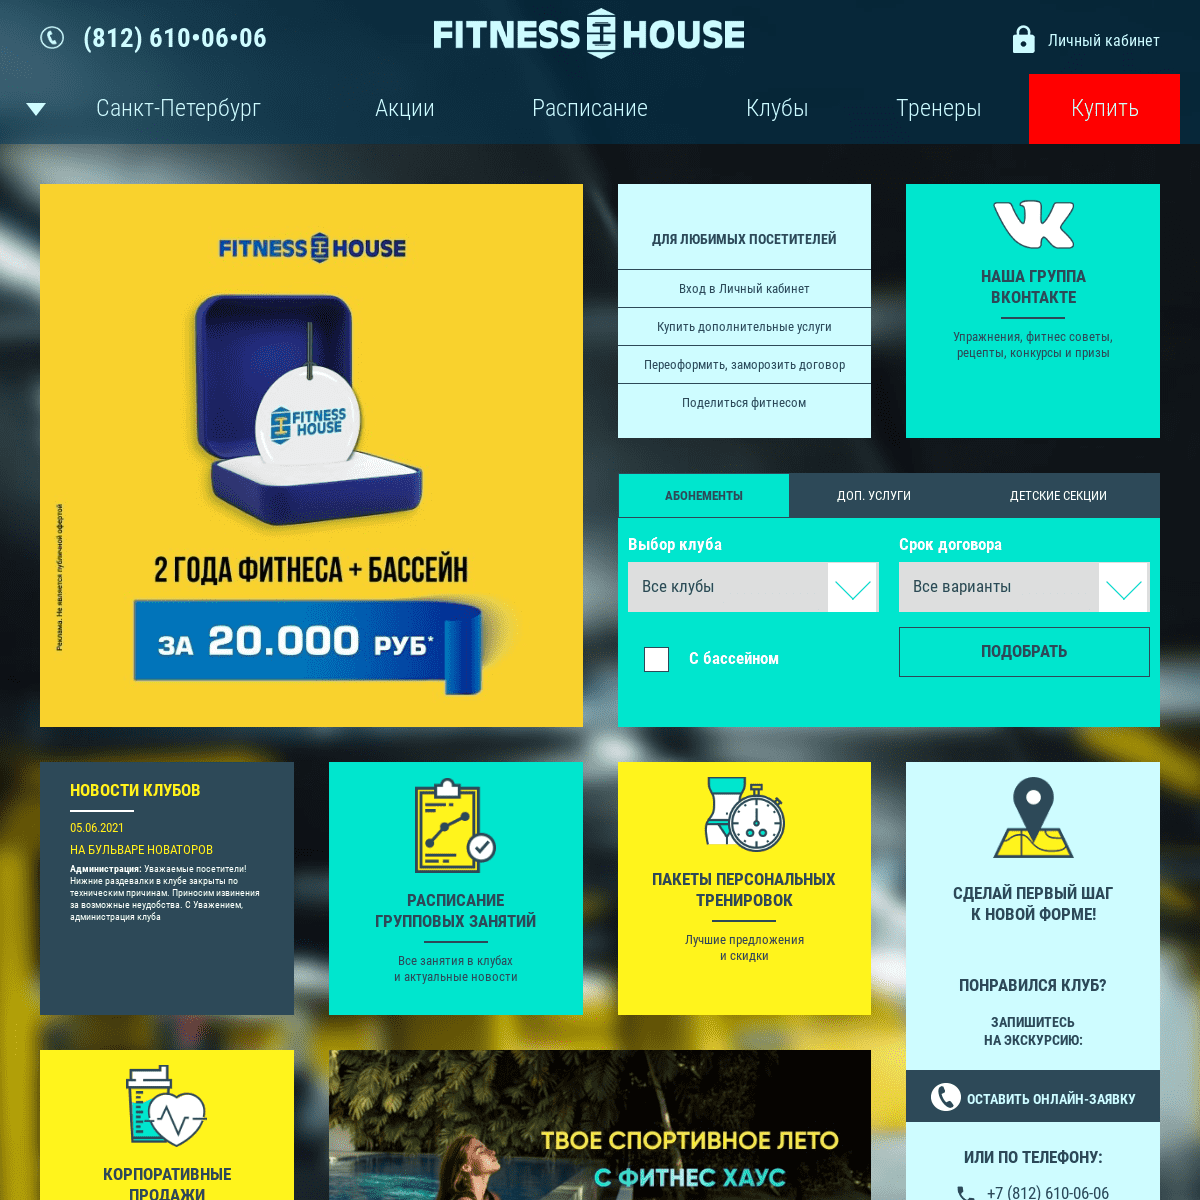 A complete backup of https://fitnesshouse.ru